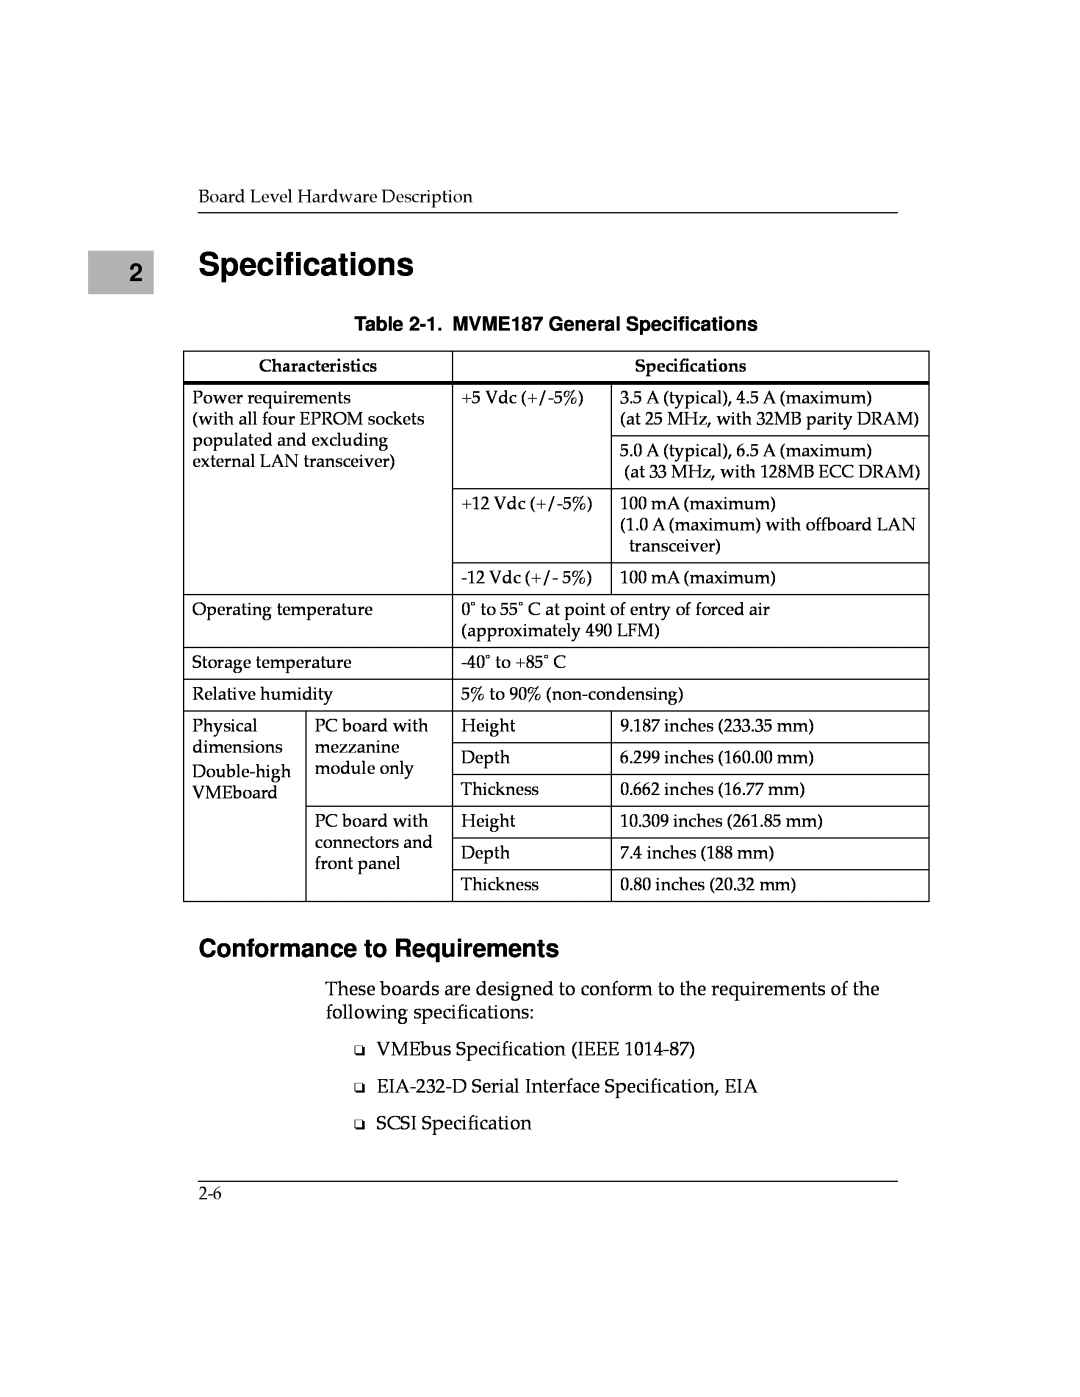 Motorola manual Conformance to Requirements, 1. MVME187 General Speciﬁcations 